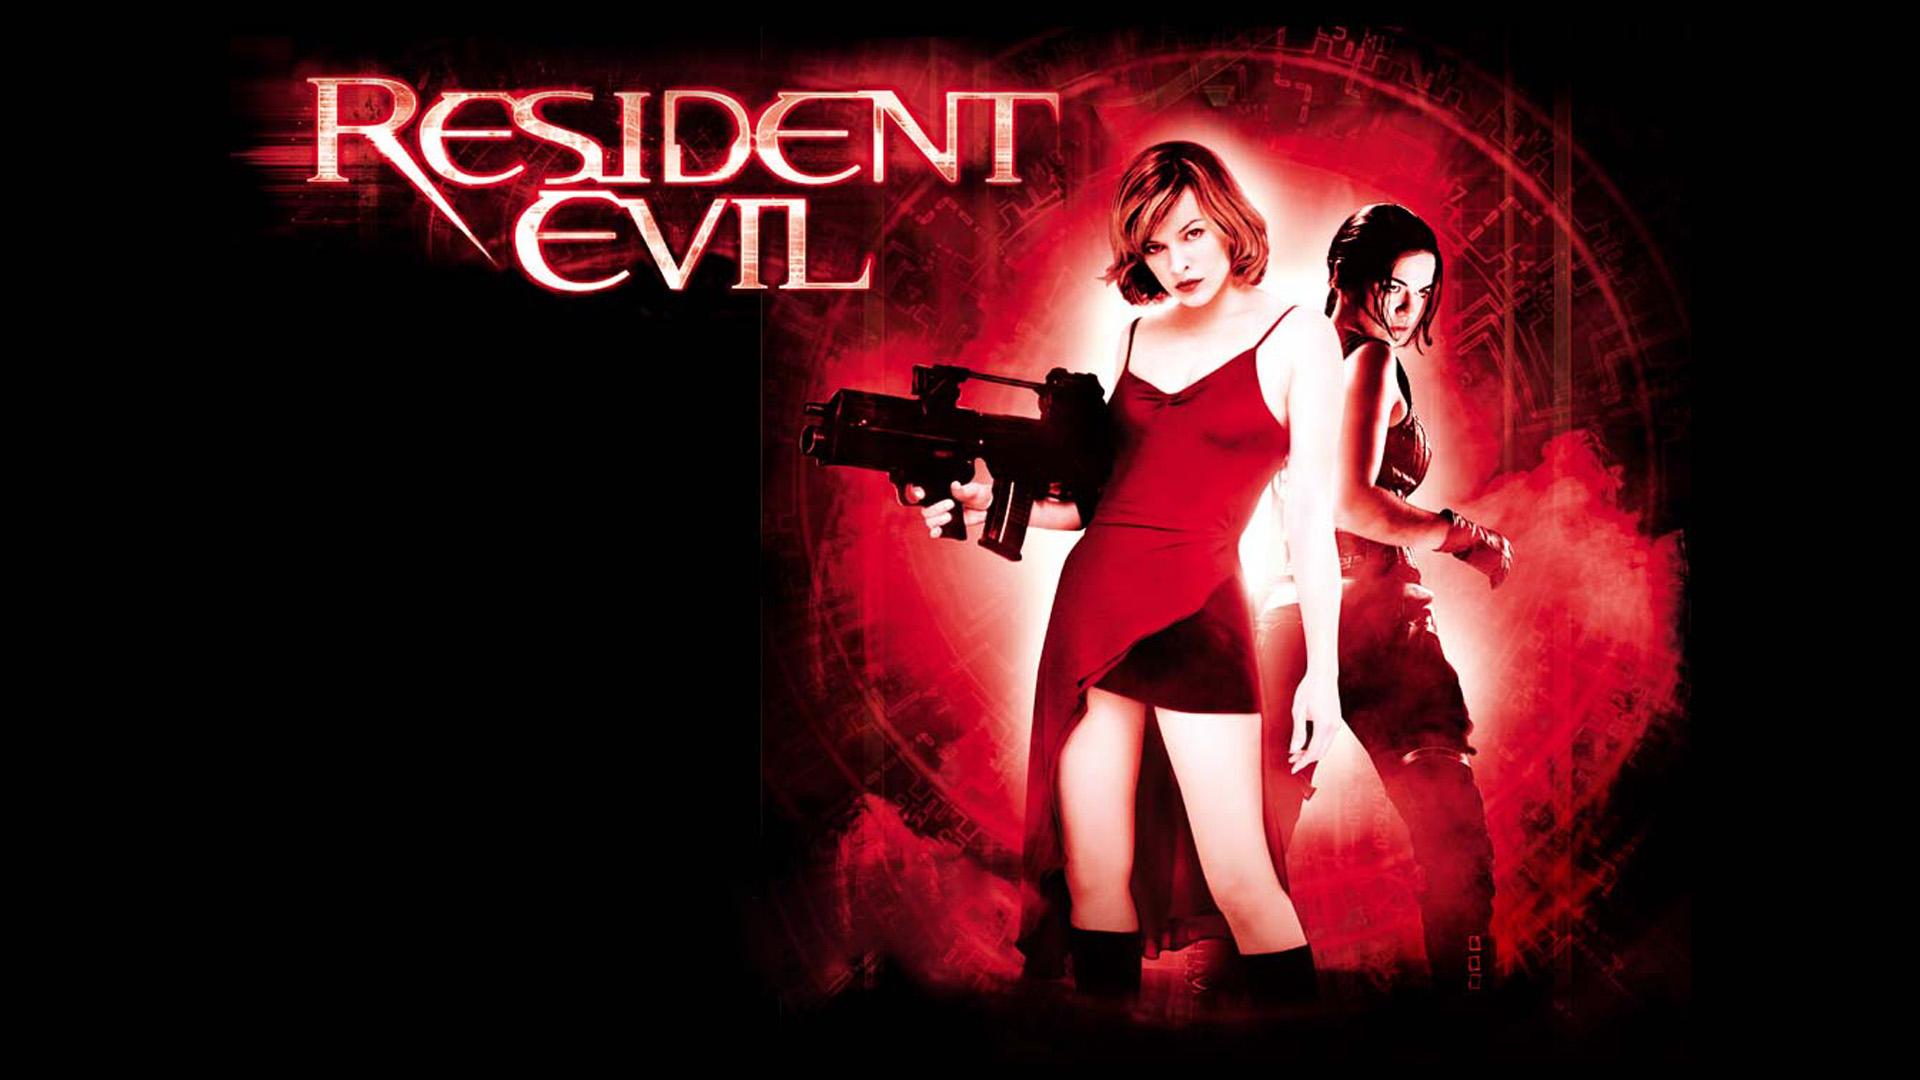 1920 x 1080 · jpeg - Resident Evil Wallpapers, Pictures, Images